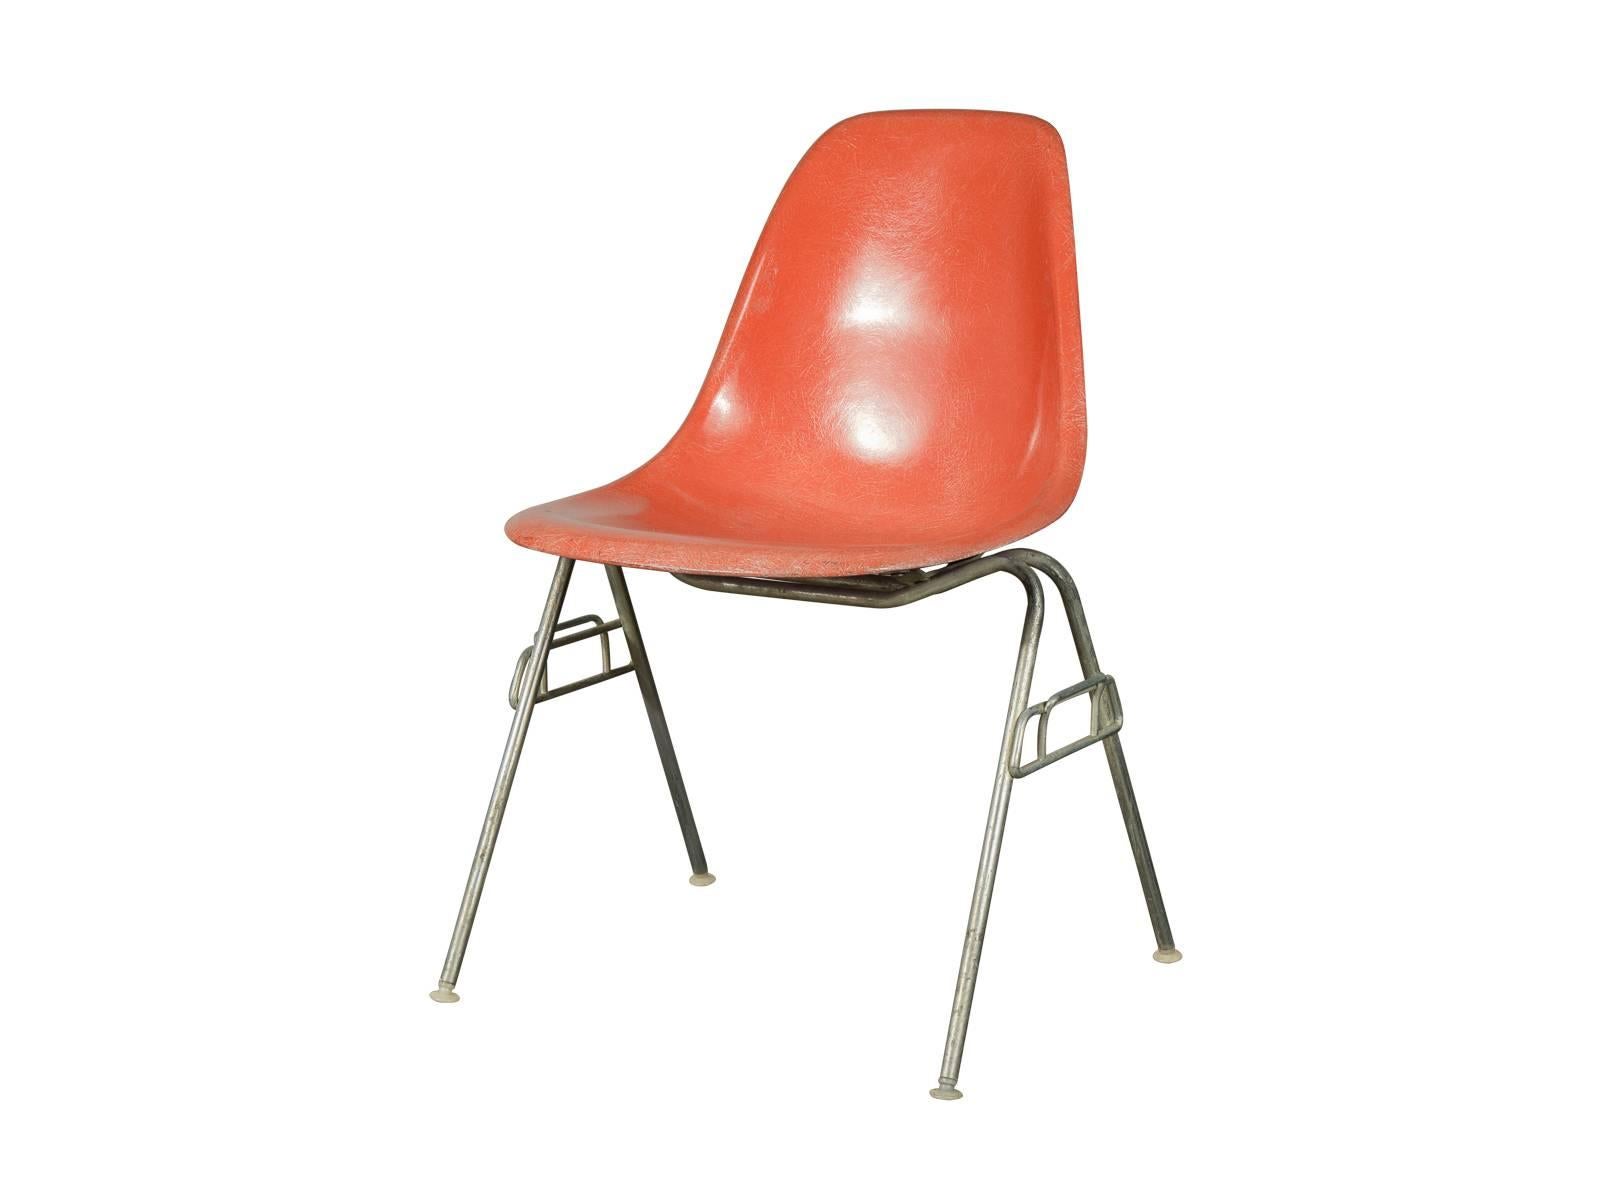 Original 1960s DSS molded fiberglass shell chairs on stacking base, designed by Charles and Ray Eames for Herman Miller. Gleaming orange shells are in original condition, each with a distinct thready texture.  Shown here mounted on stacking base,